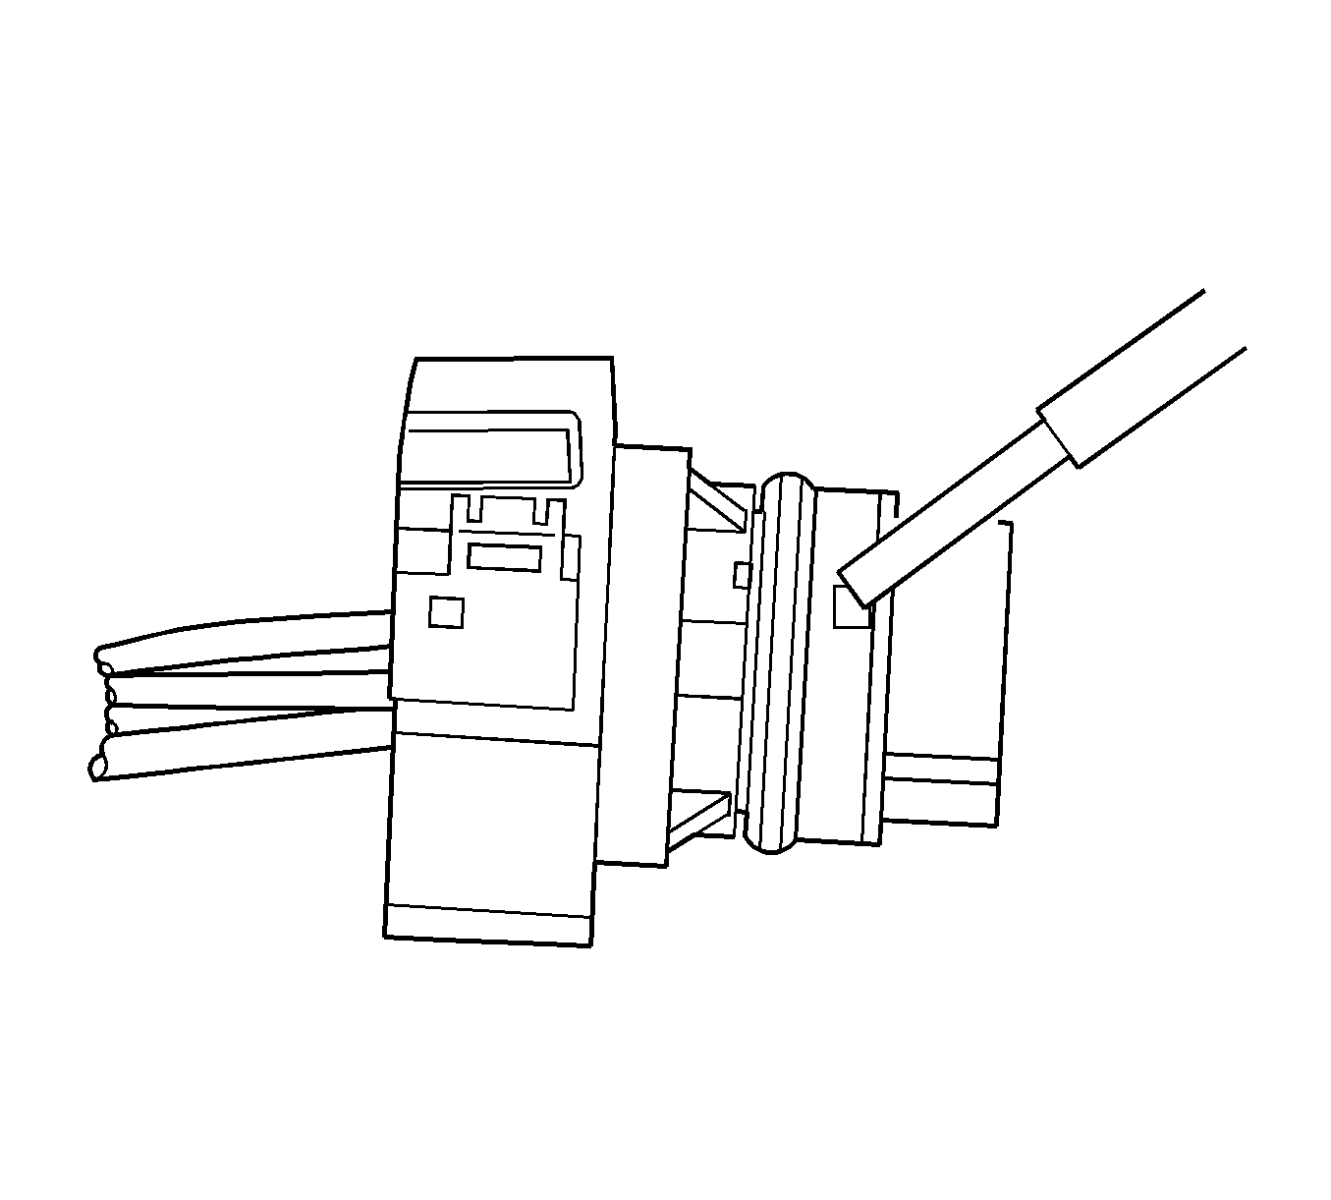 16-way electrical connector